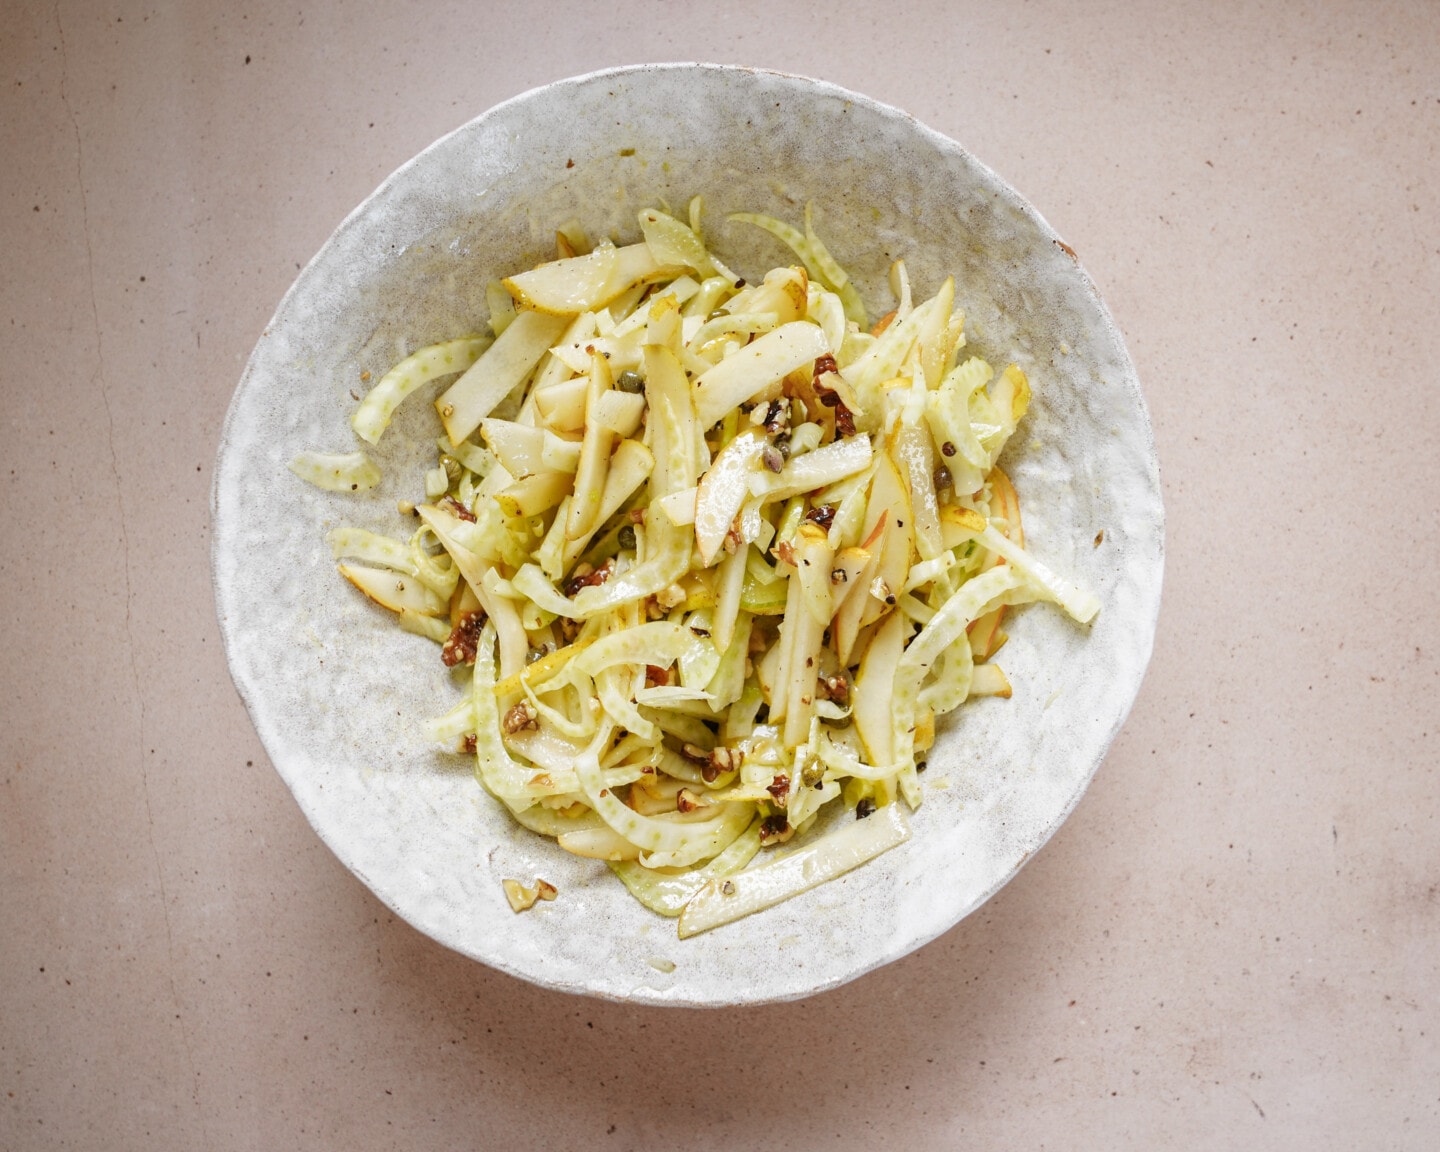 Pear salad in a bowl